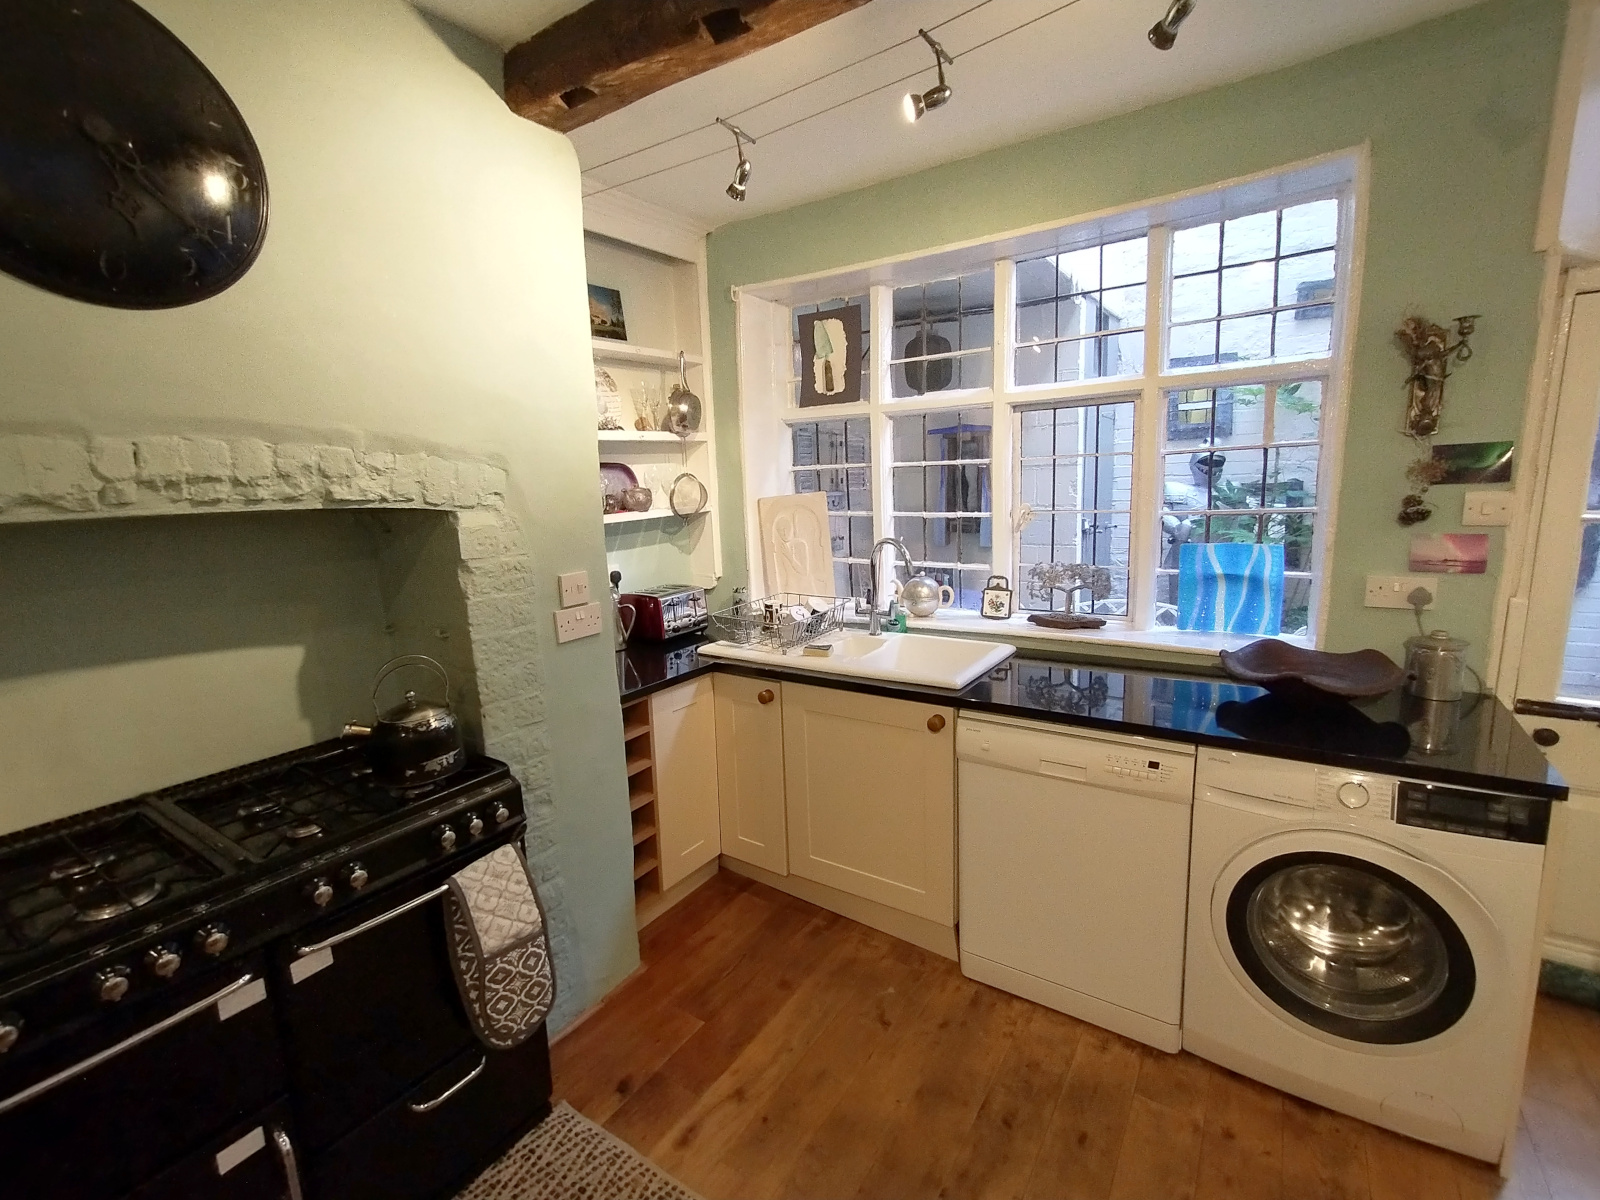 Well-equipped and homely kitchen on the ground floor